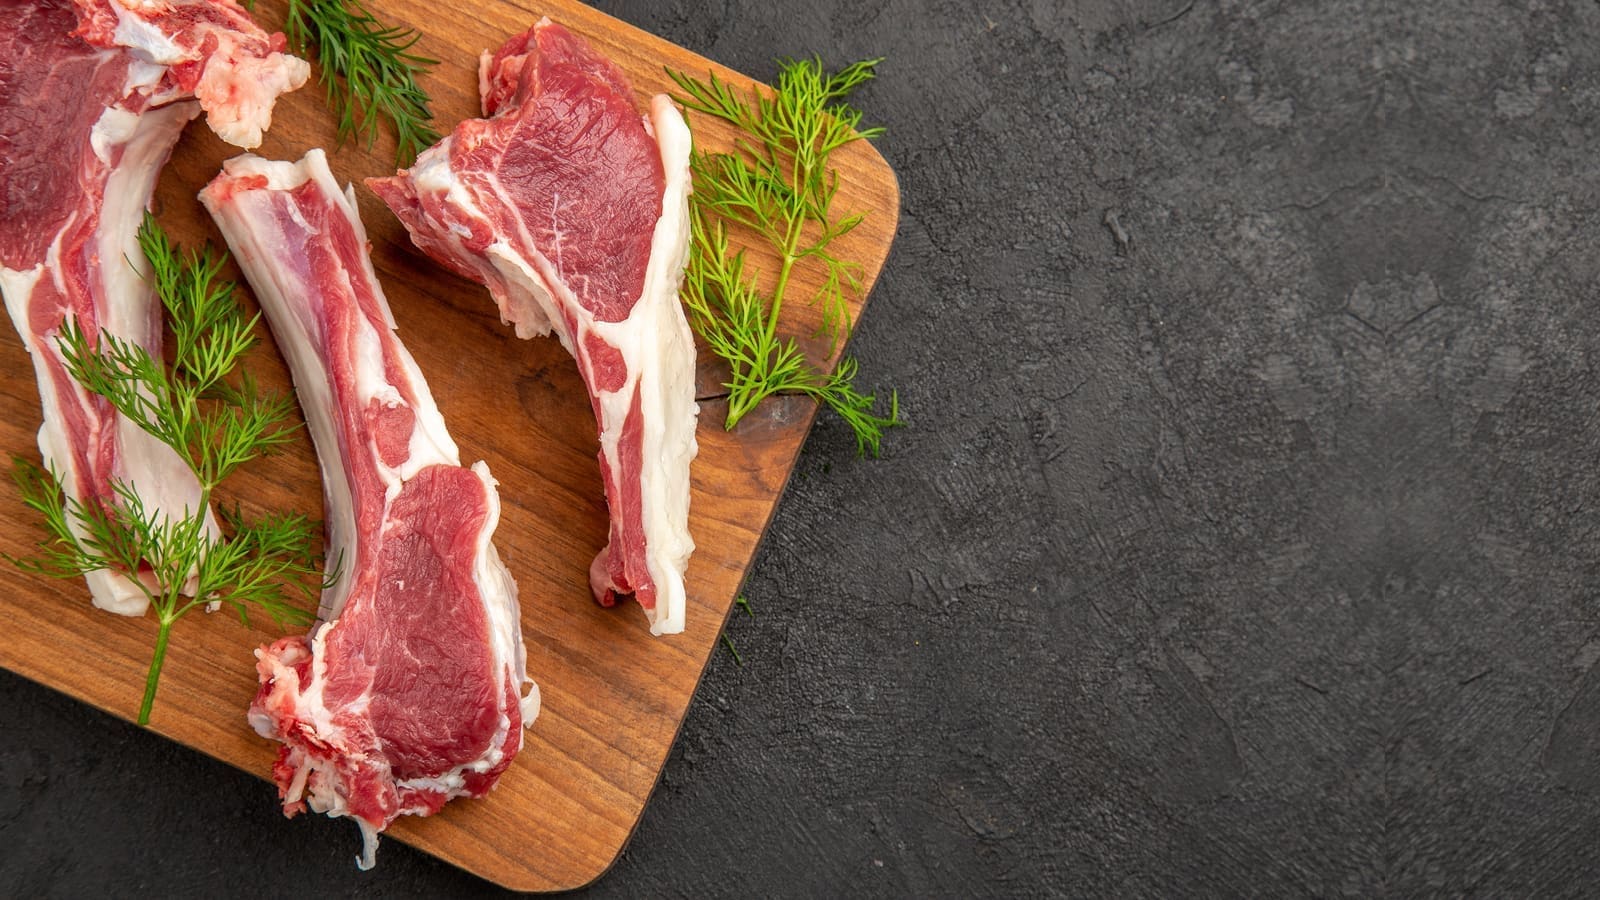 Meat Industry in Namibia: More investments needed, as sector turns East in search of new markets   